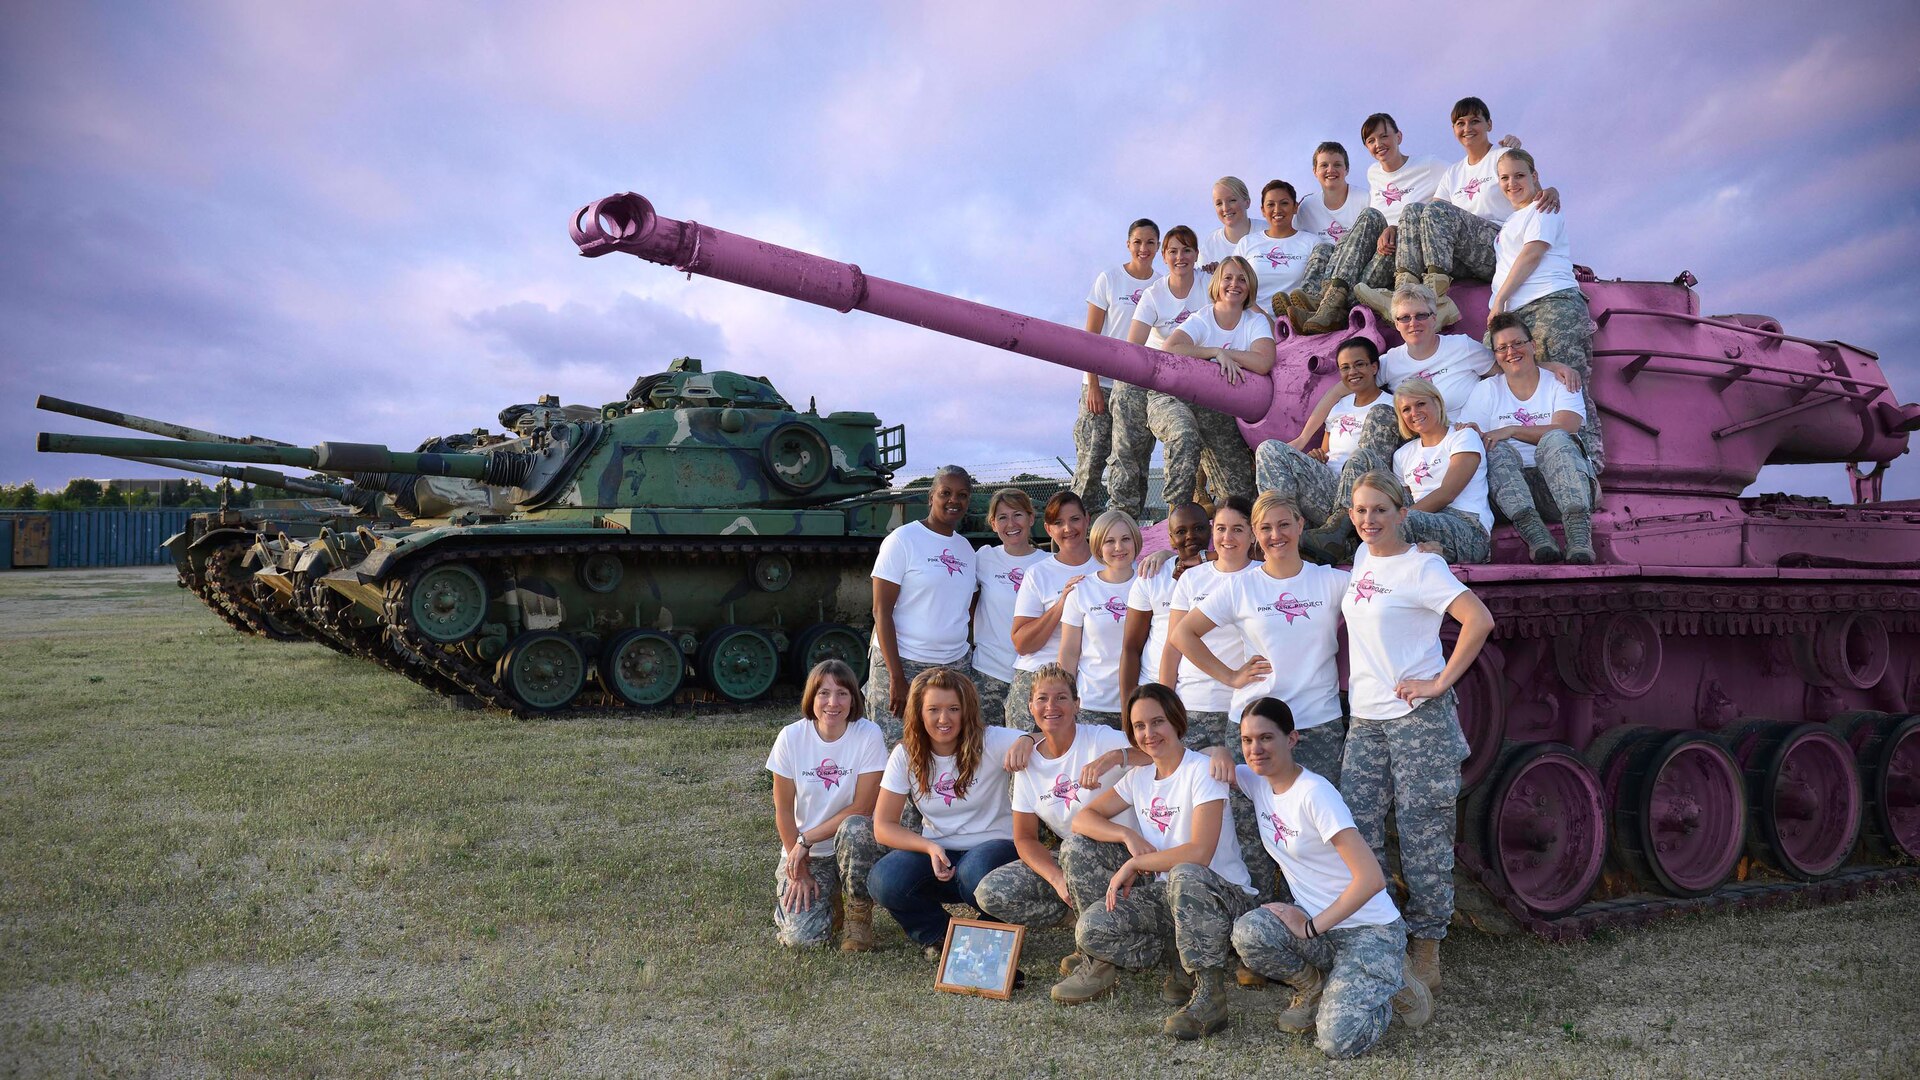 The Pink Tank Incident - Pennsylvania Military College